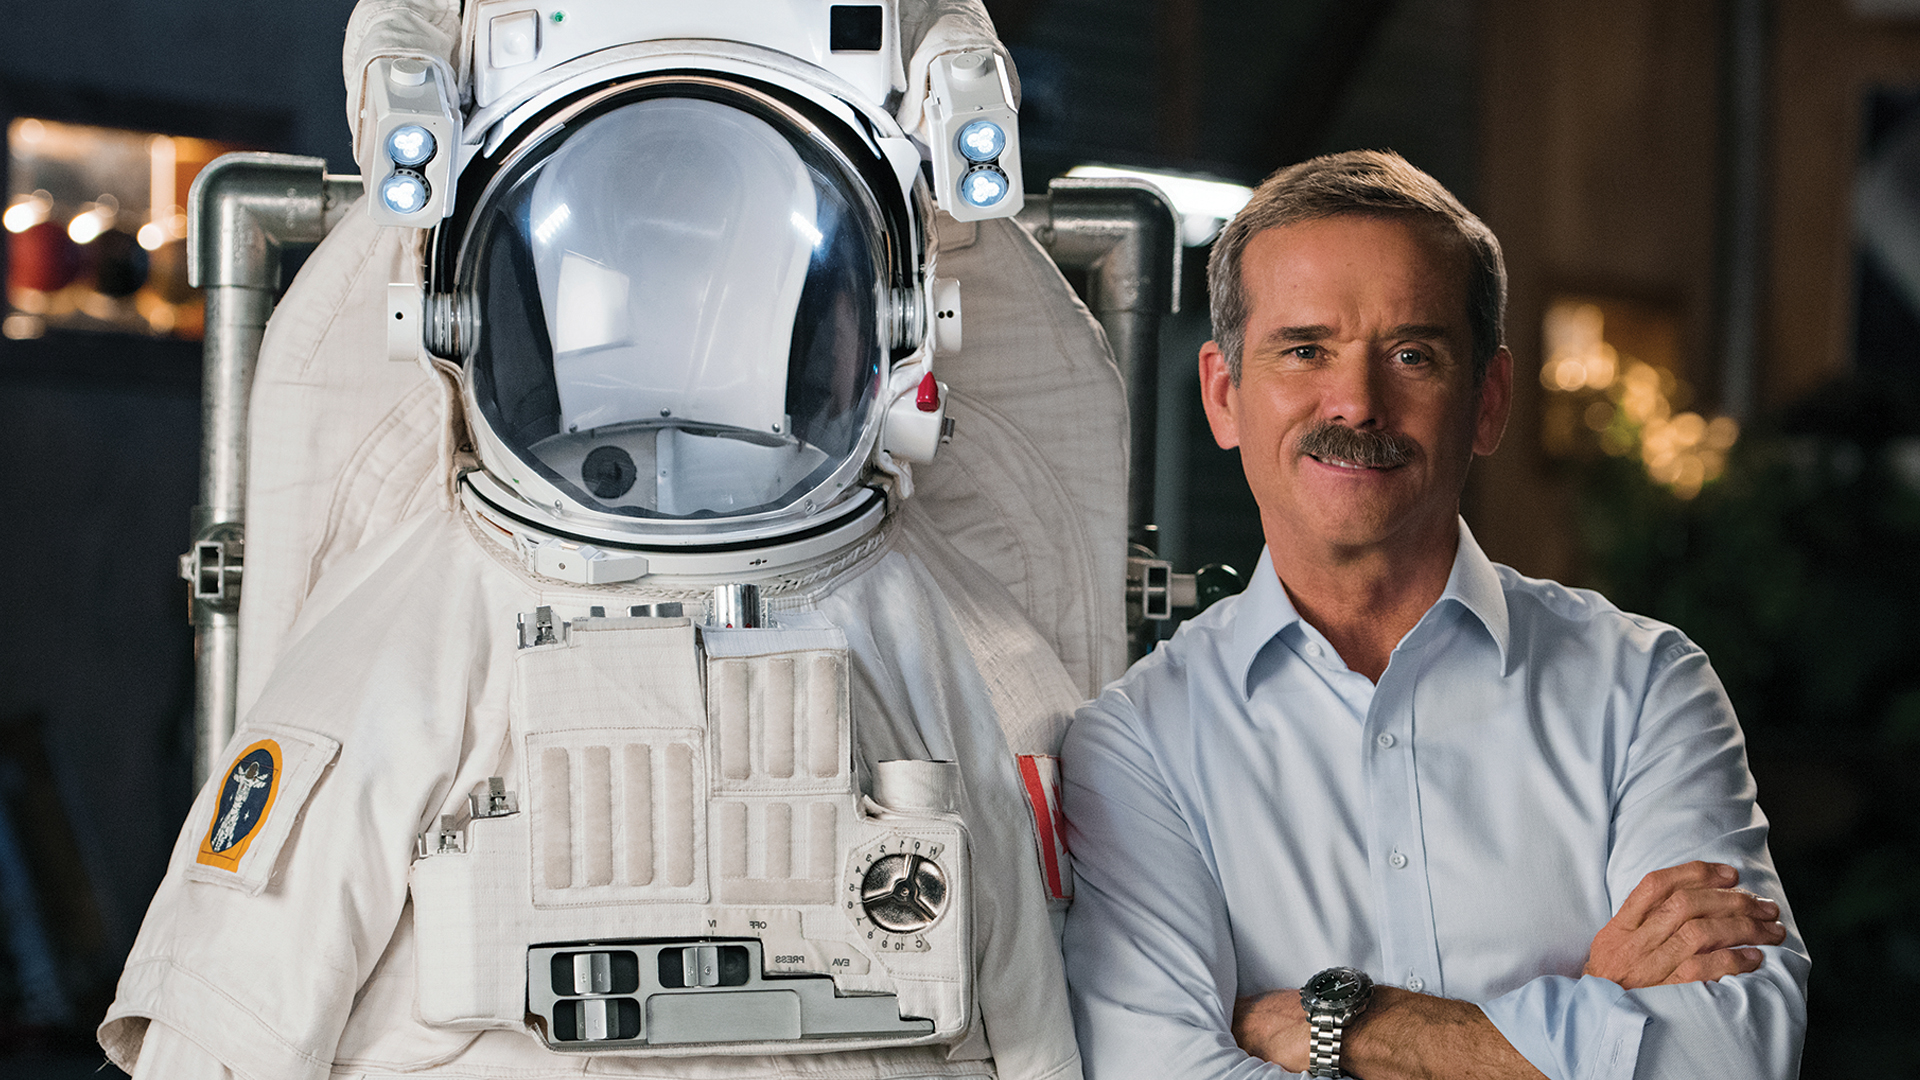 Chris Hadfield next to an astronaut's suit